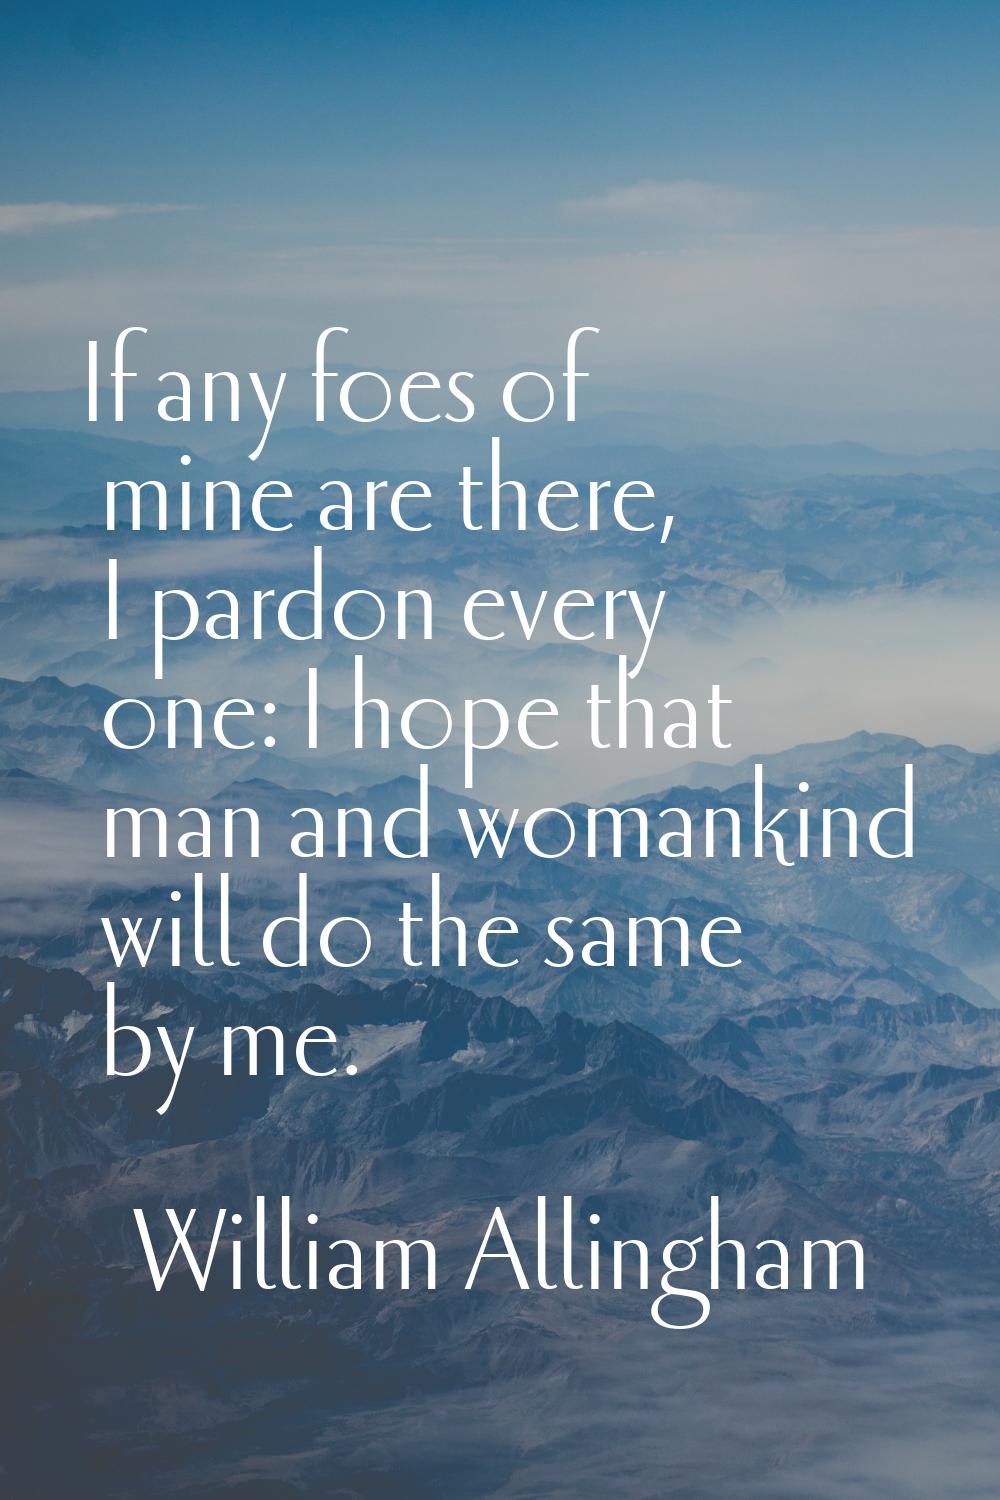 If any foes of mine are there, I pardon every one: I hope that man and womankind will do the same b